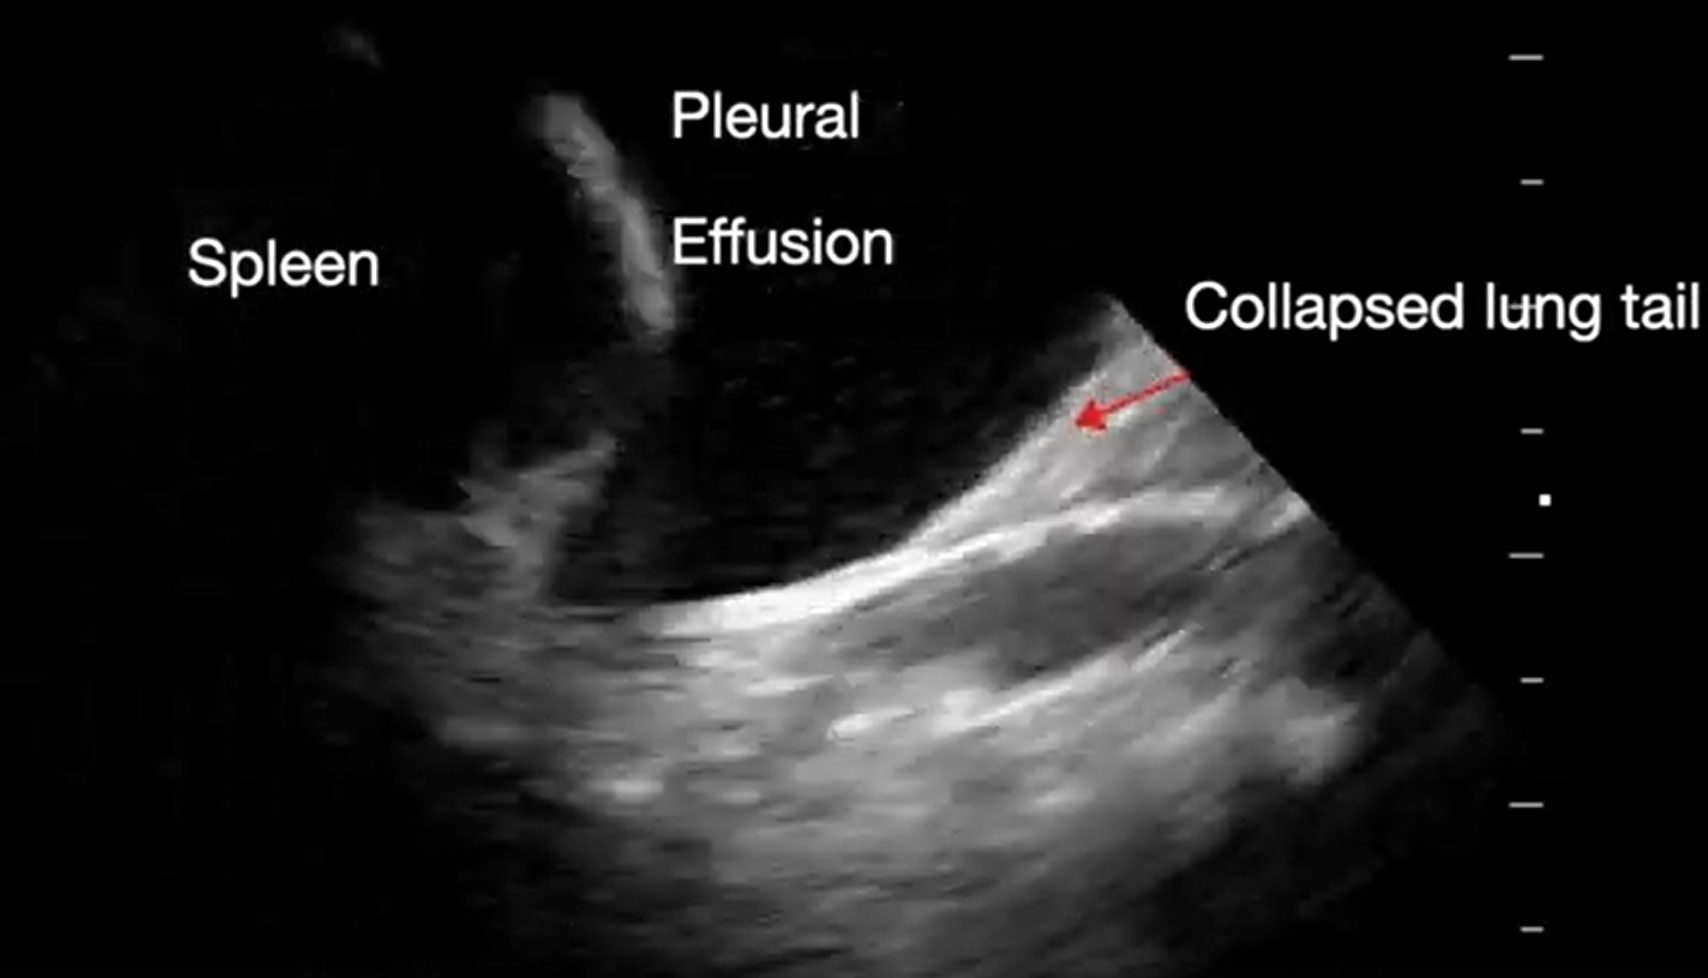 Supplemental Video 4. Sonogram of the lateral inferior thorax demonstrating pleural effusion